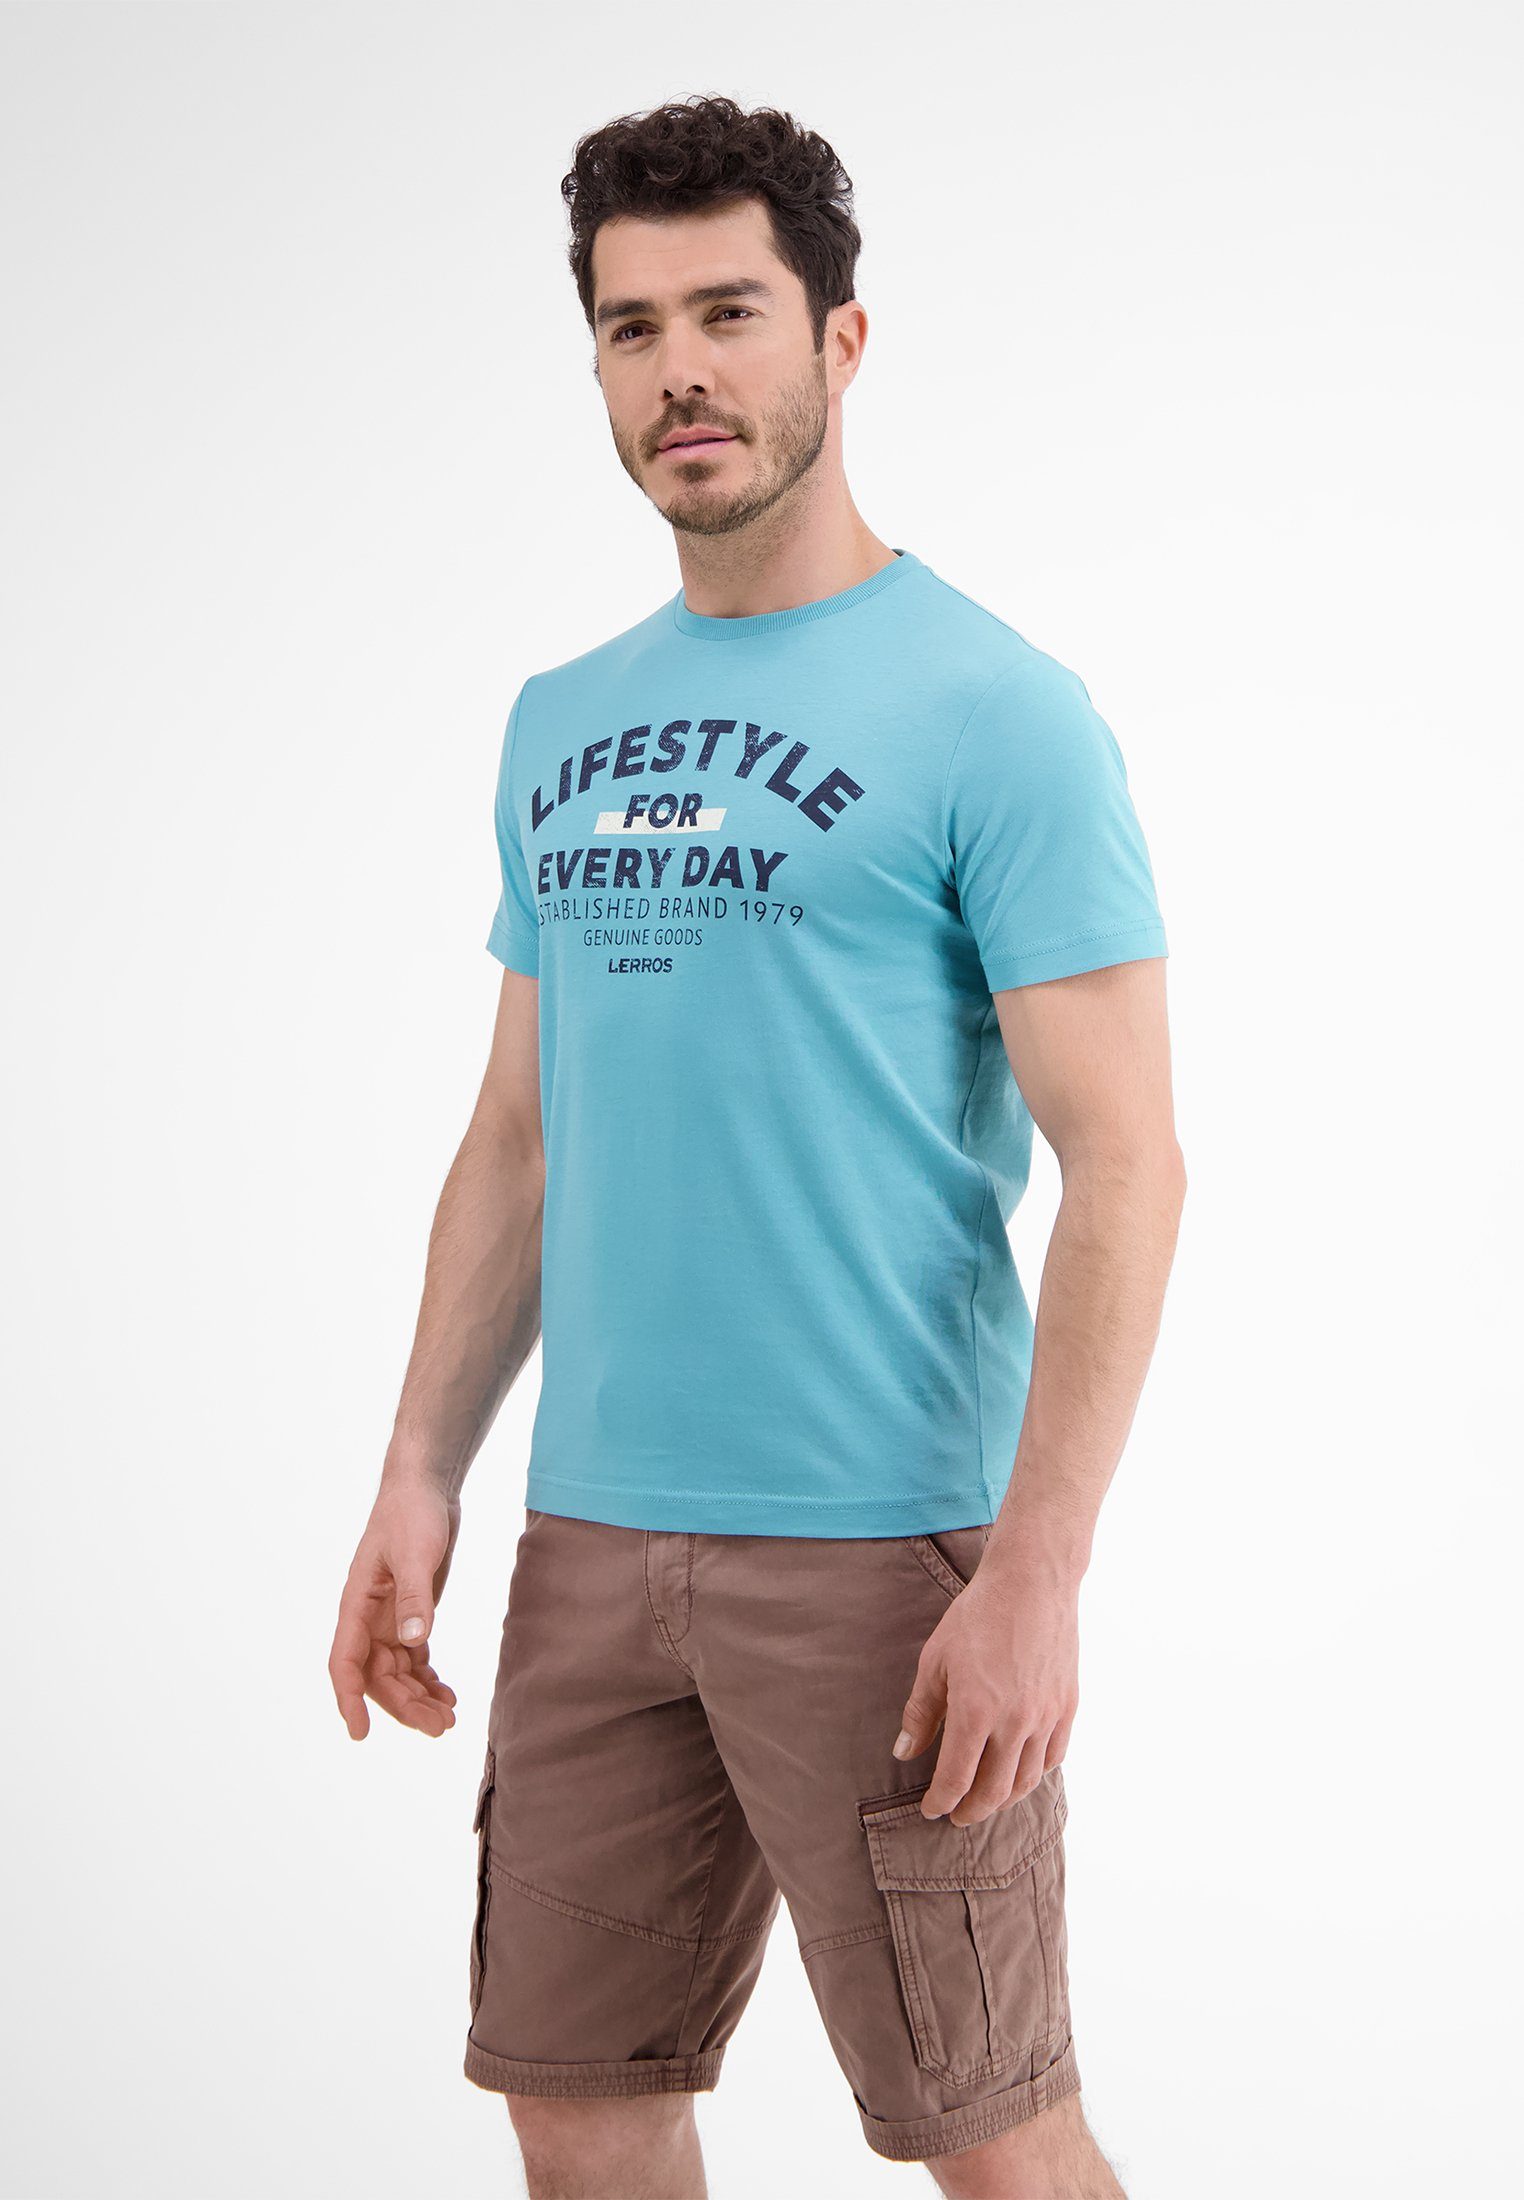 day* T-Shirt BLUE T-Shirt SKY LERROS *Lifestyle LERROS for every